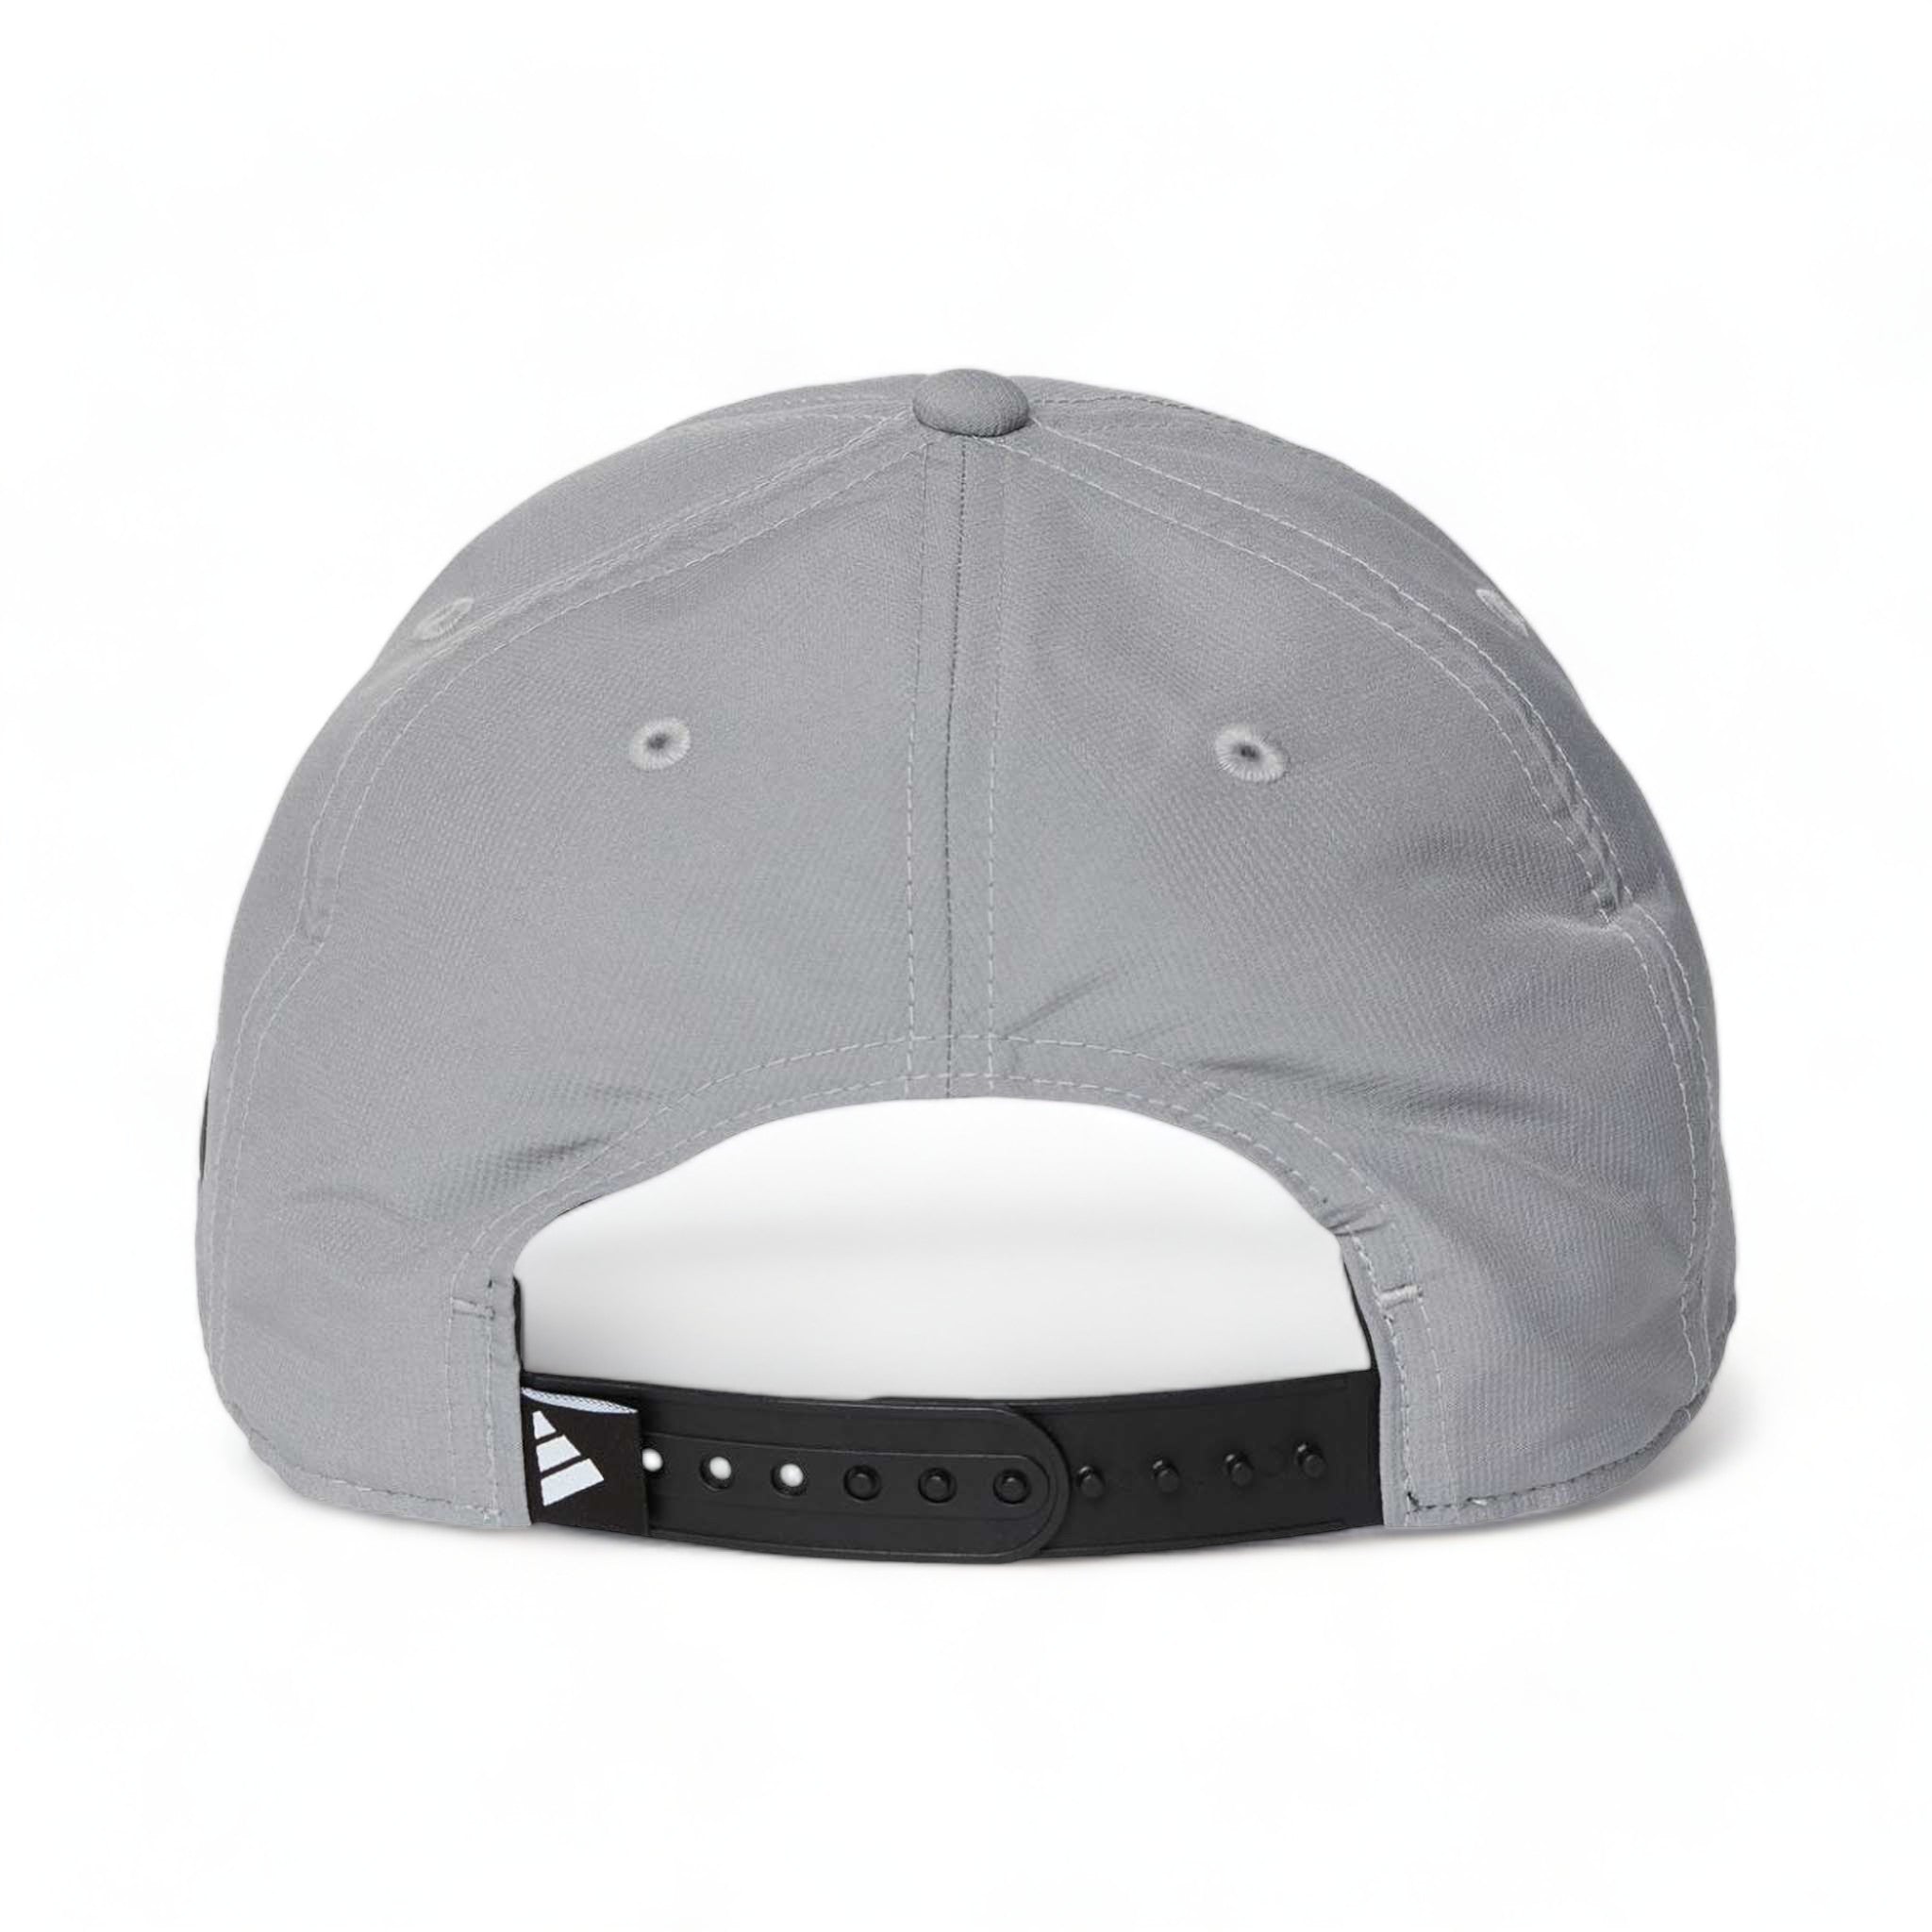 Back view of Adidas A605S custom hat in grey three